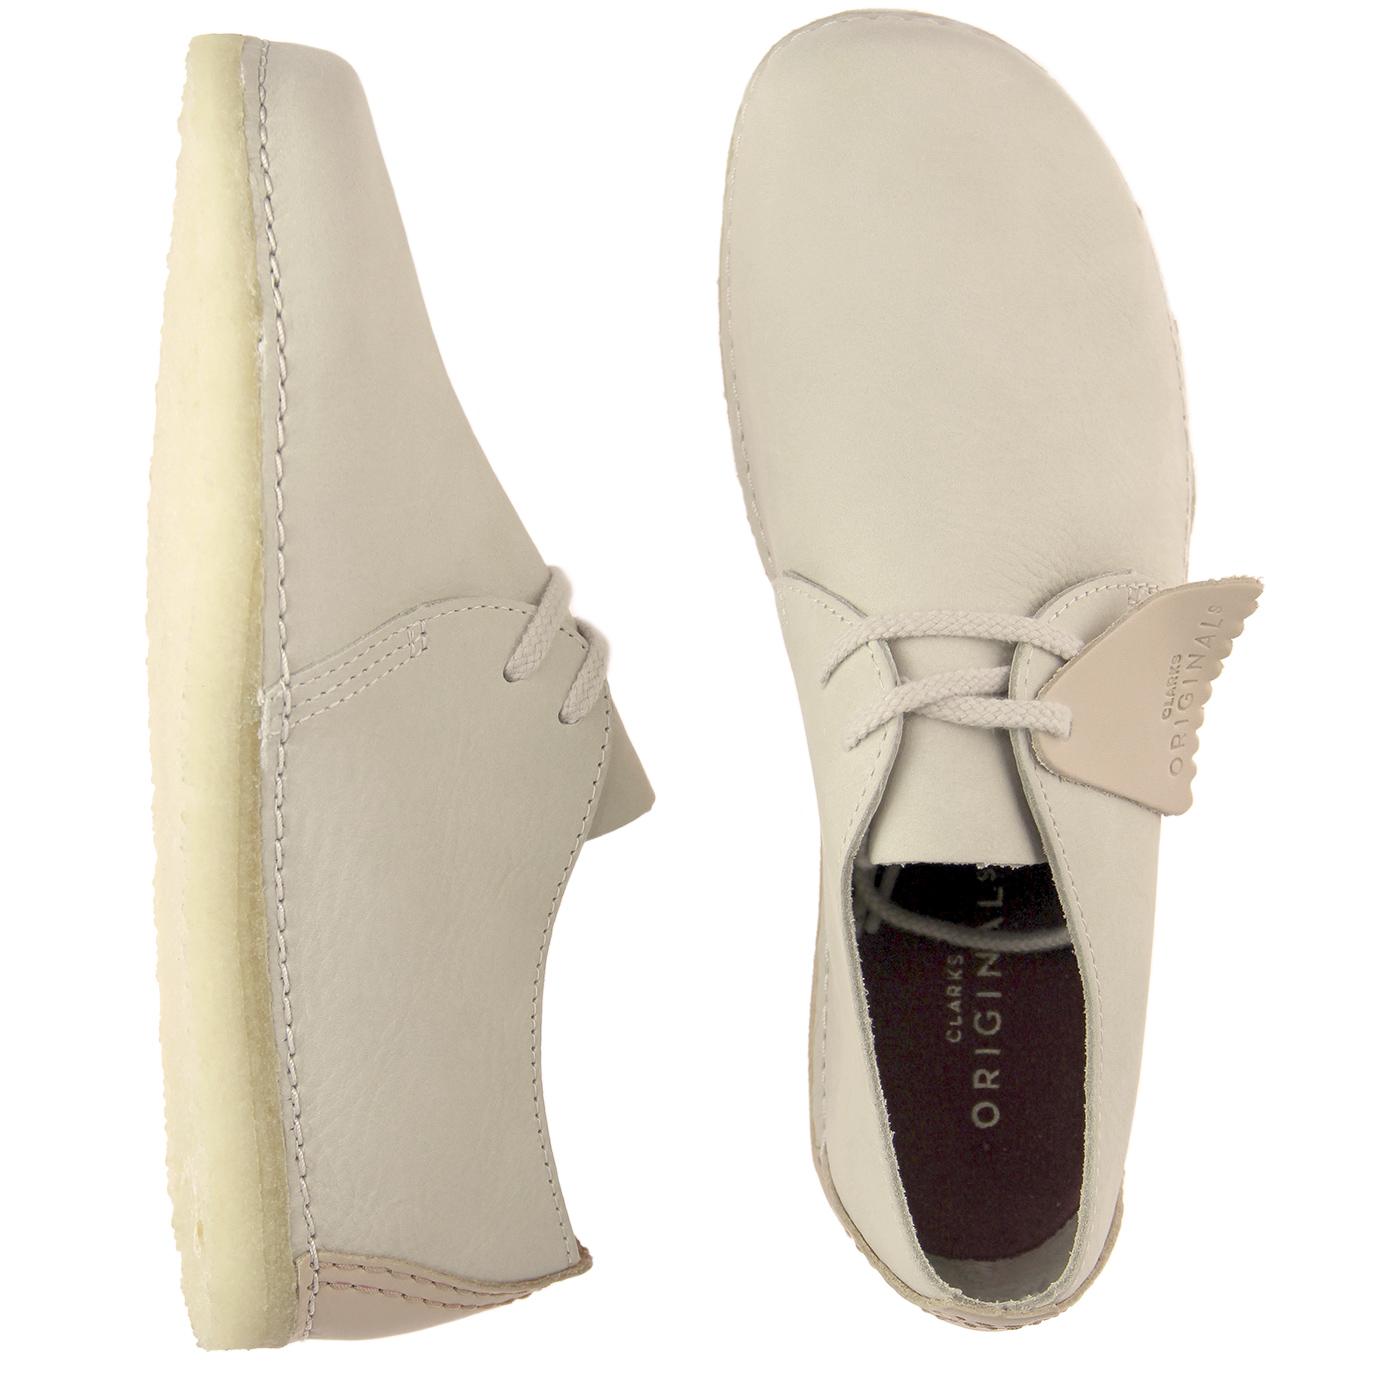 clarks shoes international delivery off 